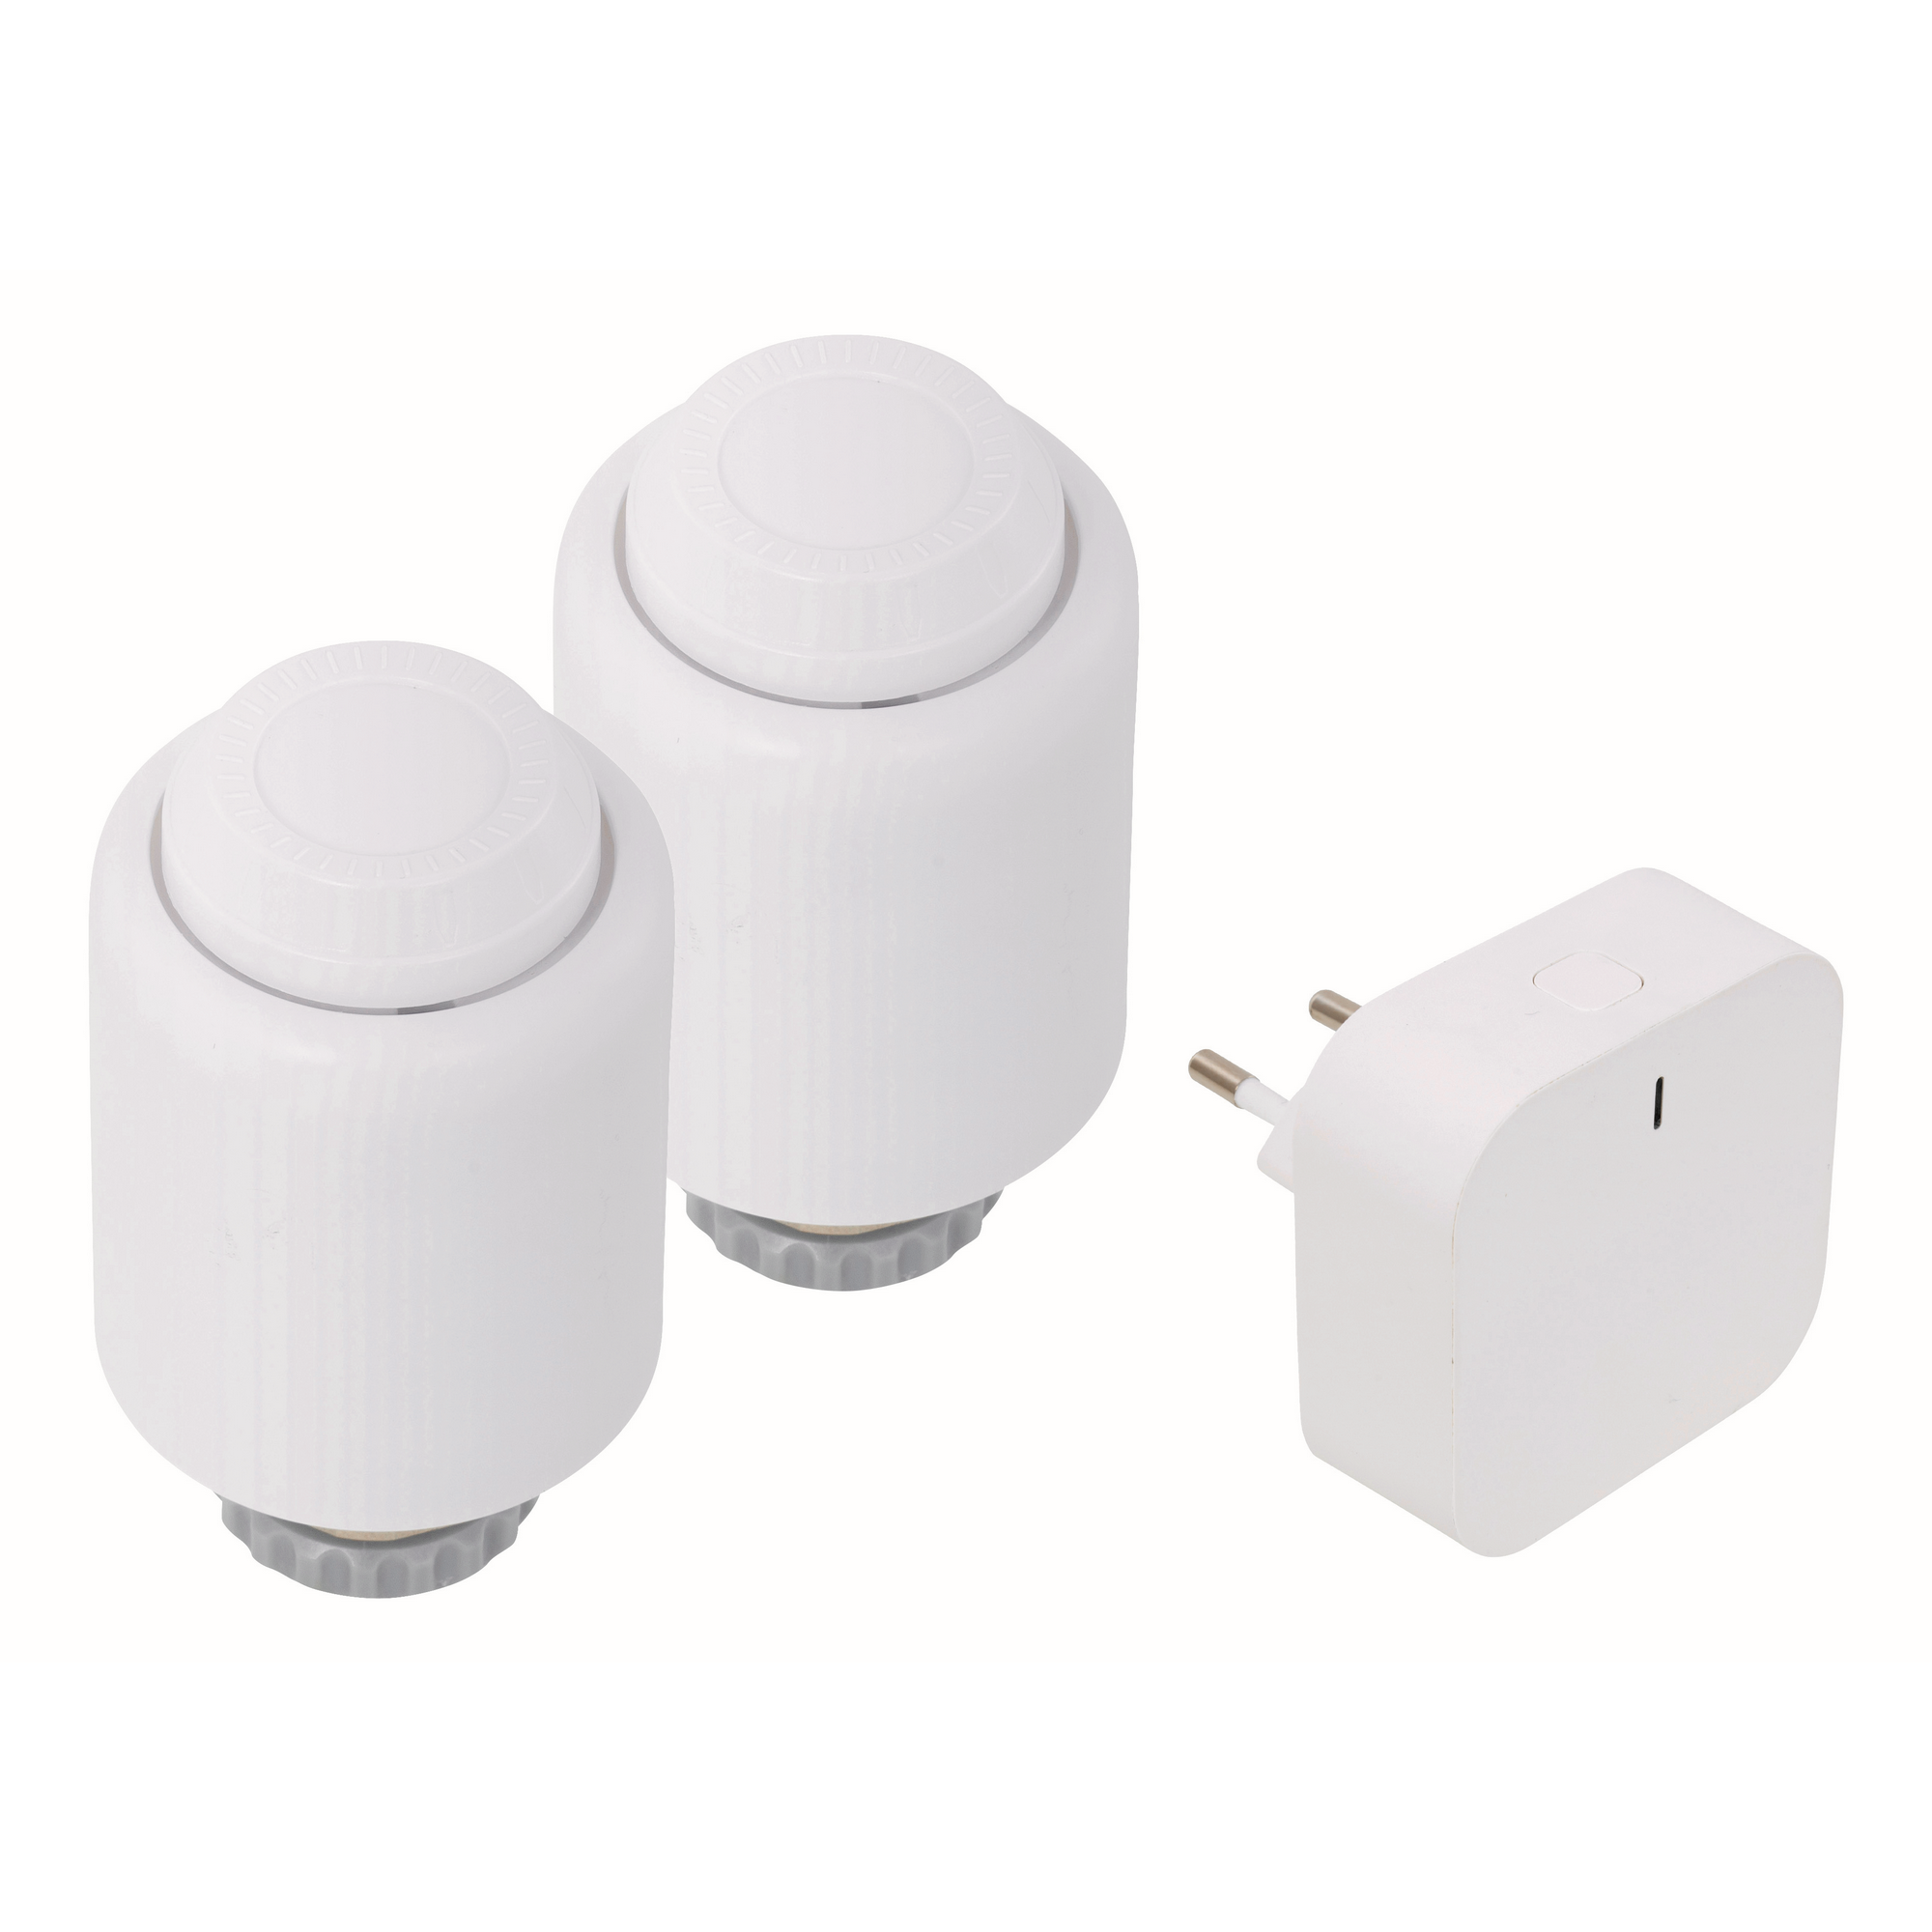 Heizkörperthermostat-Set Smart Home ZigBee 3-teilig + product picture